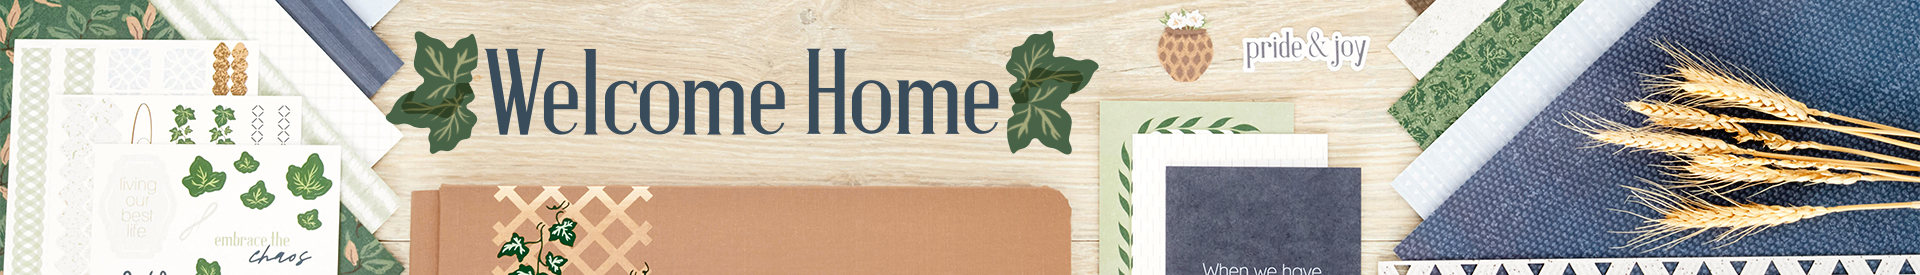 Home-Themed Scrapbooking Supplies: Welcome Home